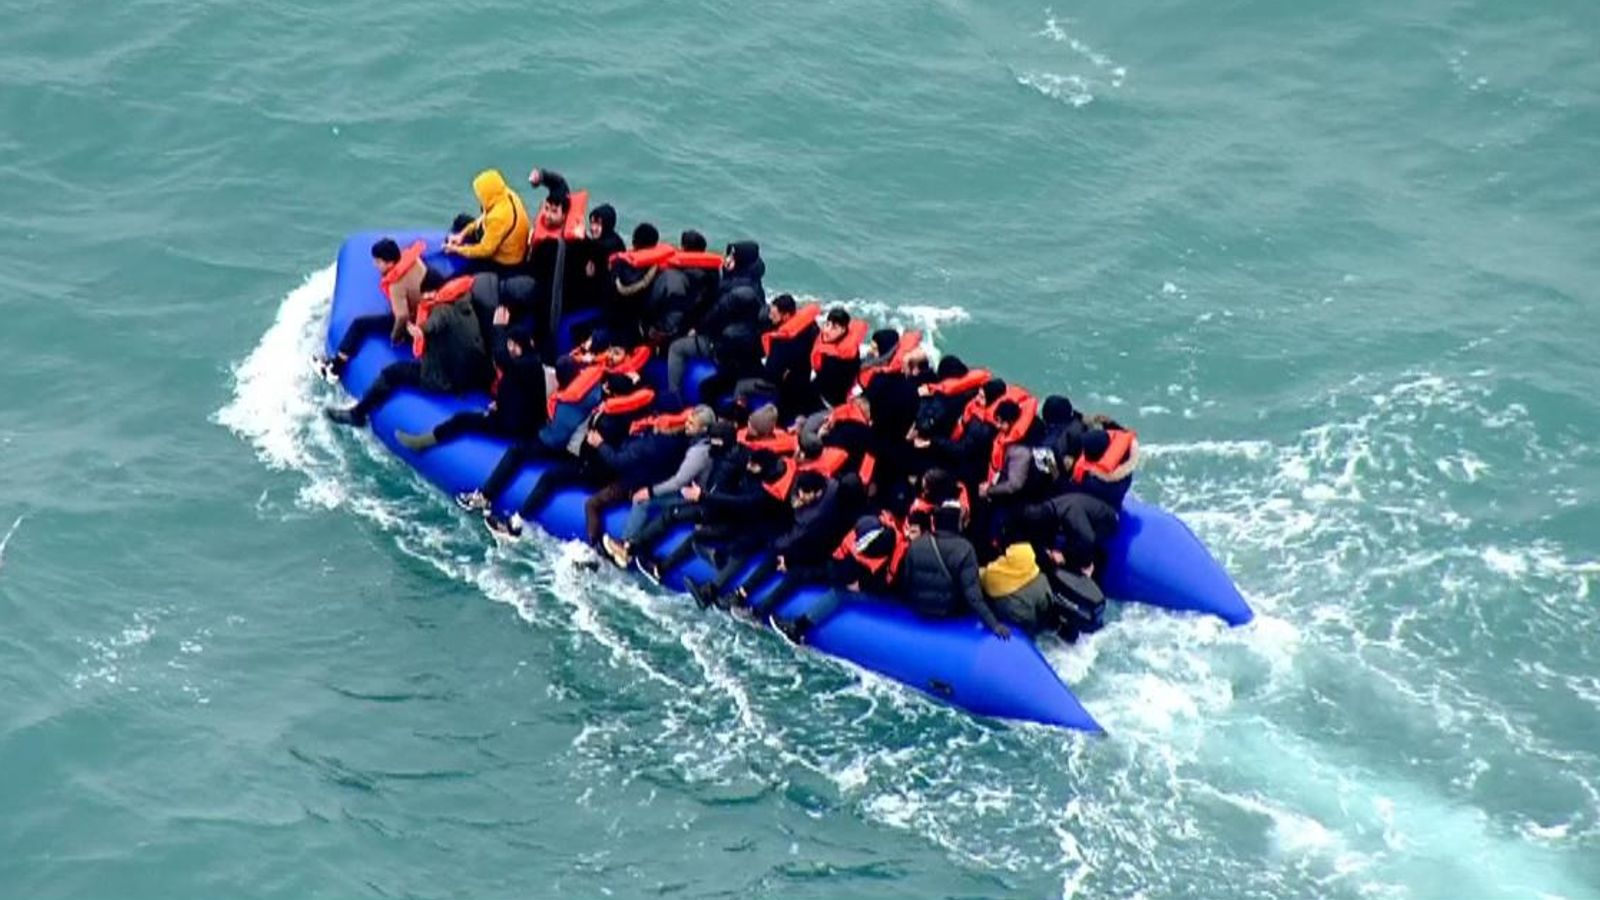 Footage shows boat carrying migrants attempting to cross Channel